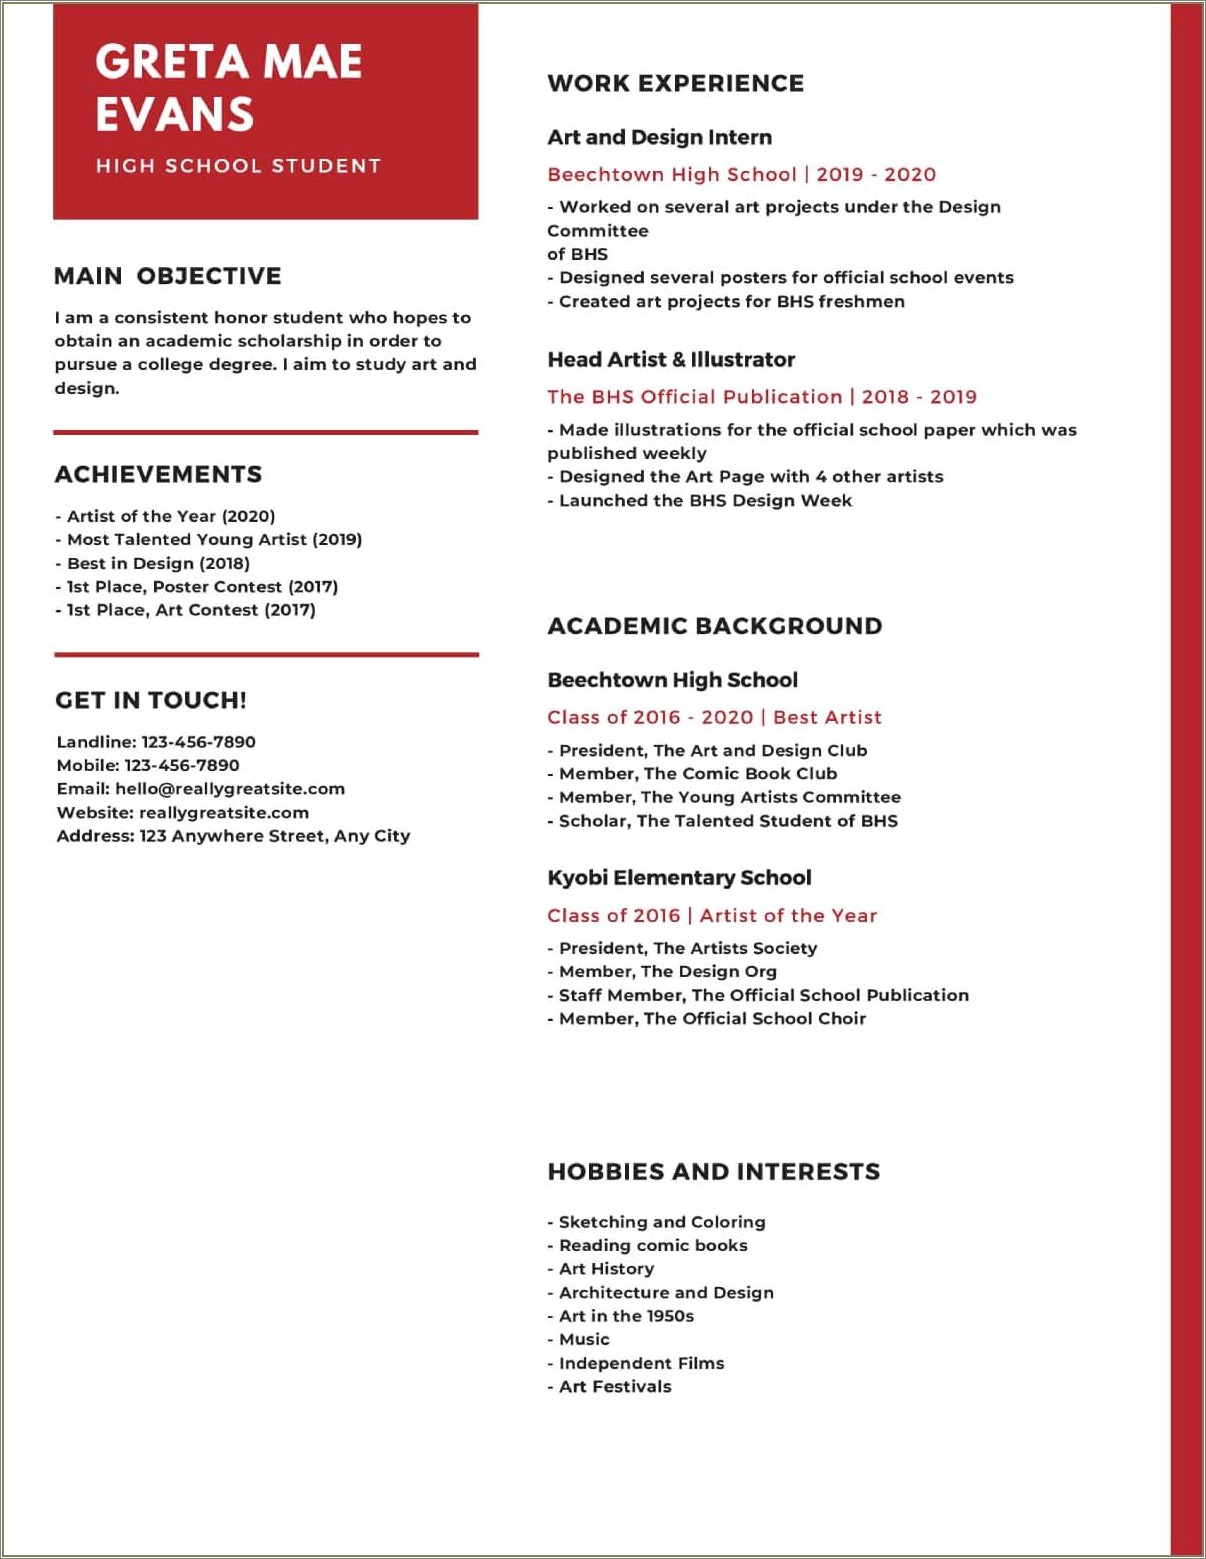 Resume Format School At Top Or Bottom